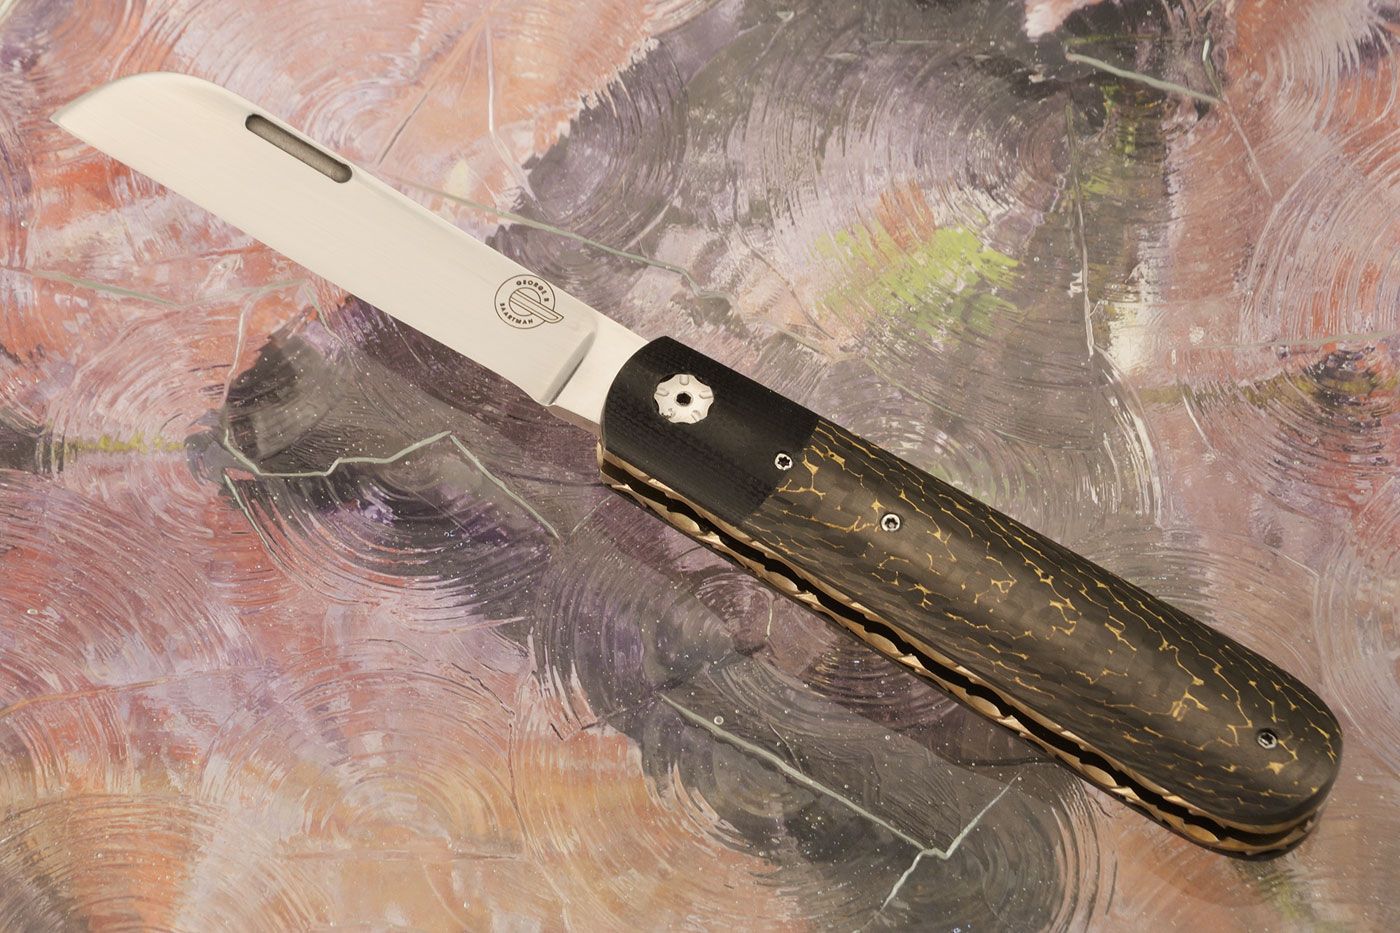 Wharncliffe Slipjoint with Gold Snakeskin FatCarbon - M390